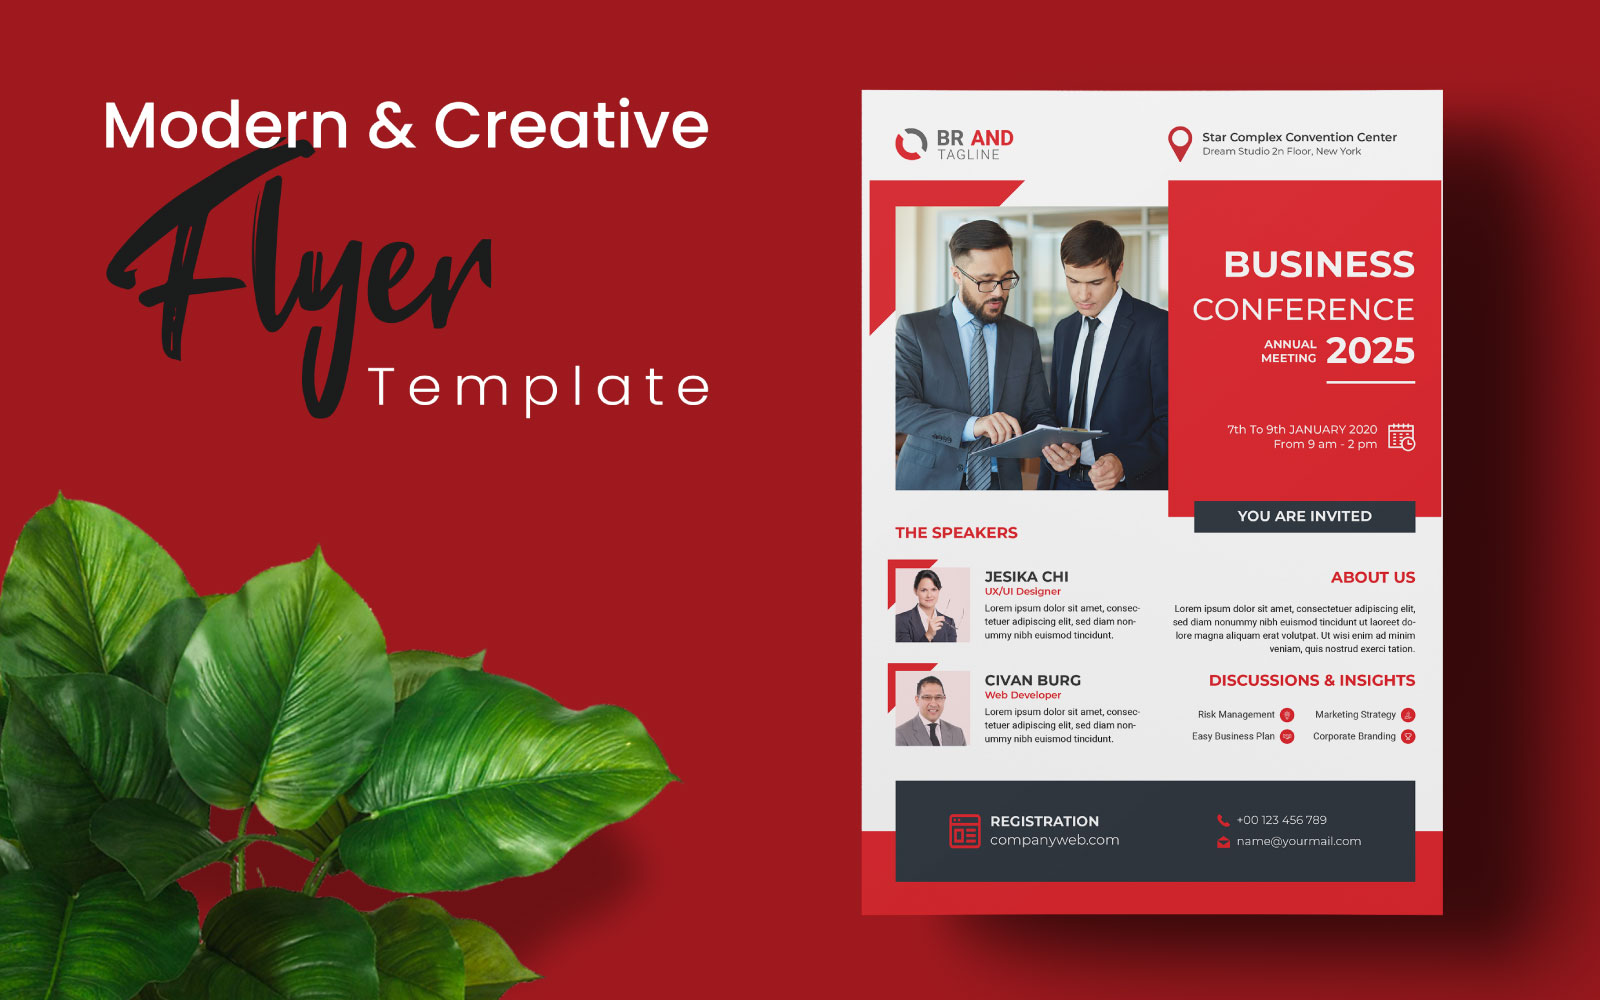 Business Conference Flyer Template Design